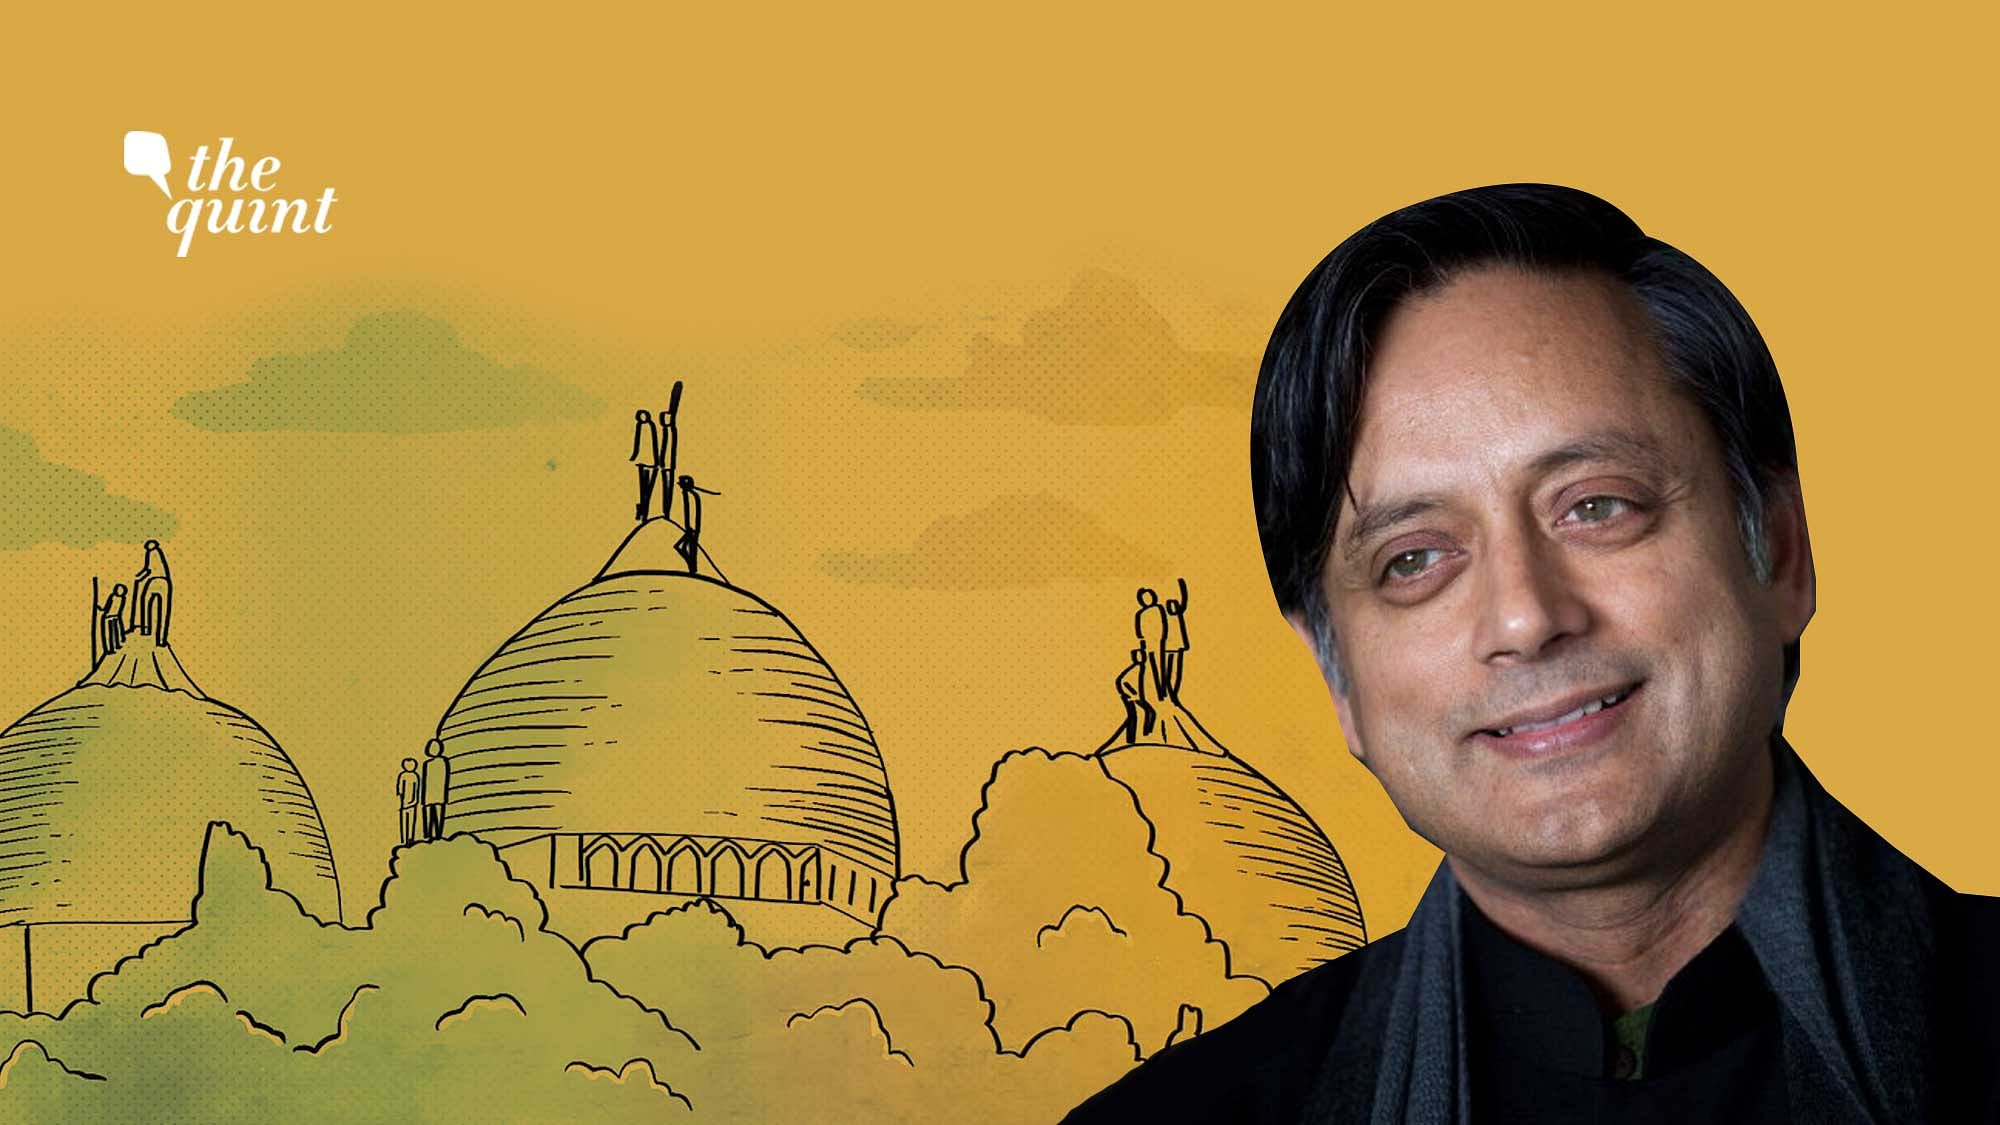 Image of the Babri-Ayodhya site, and a profile photo of Dr Shashi Tharoor, used for representational purposes.